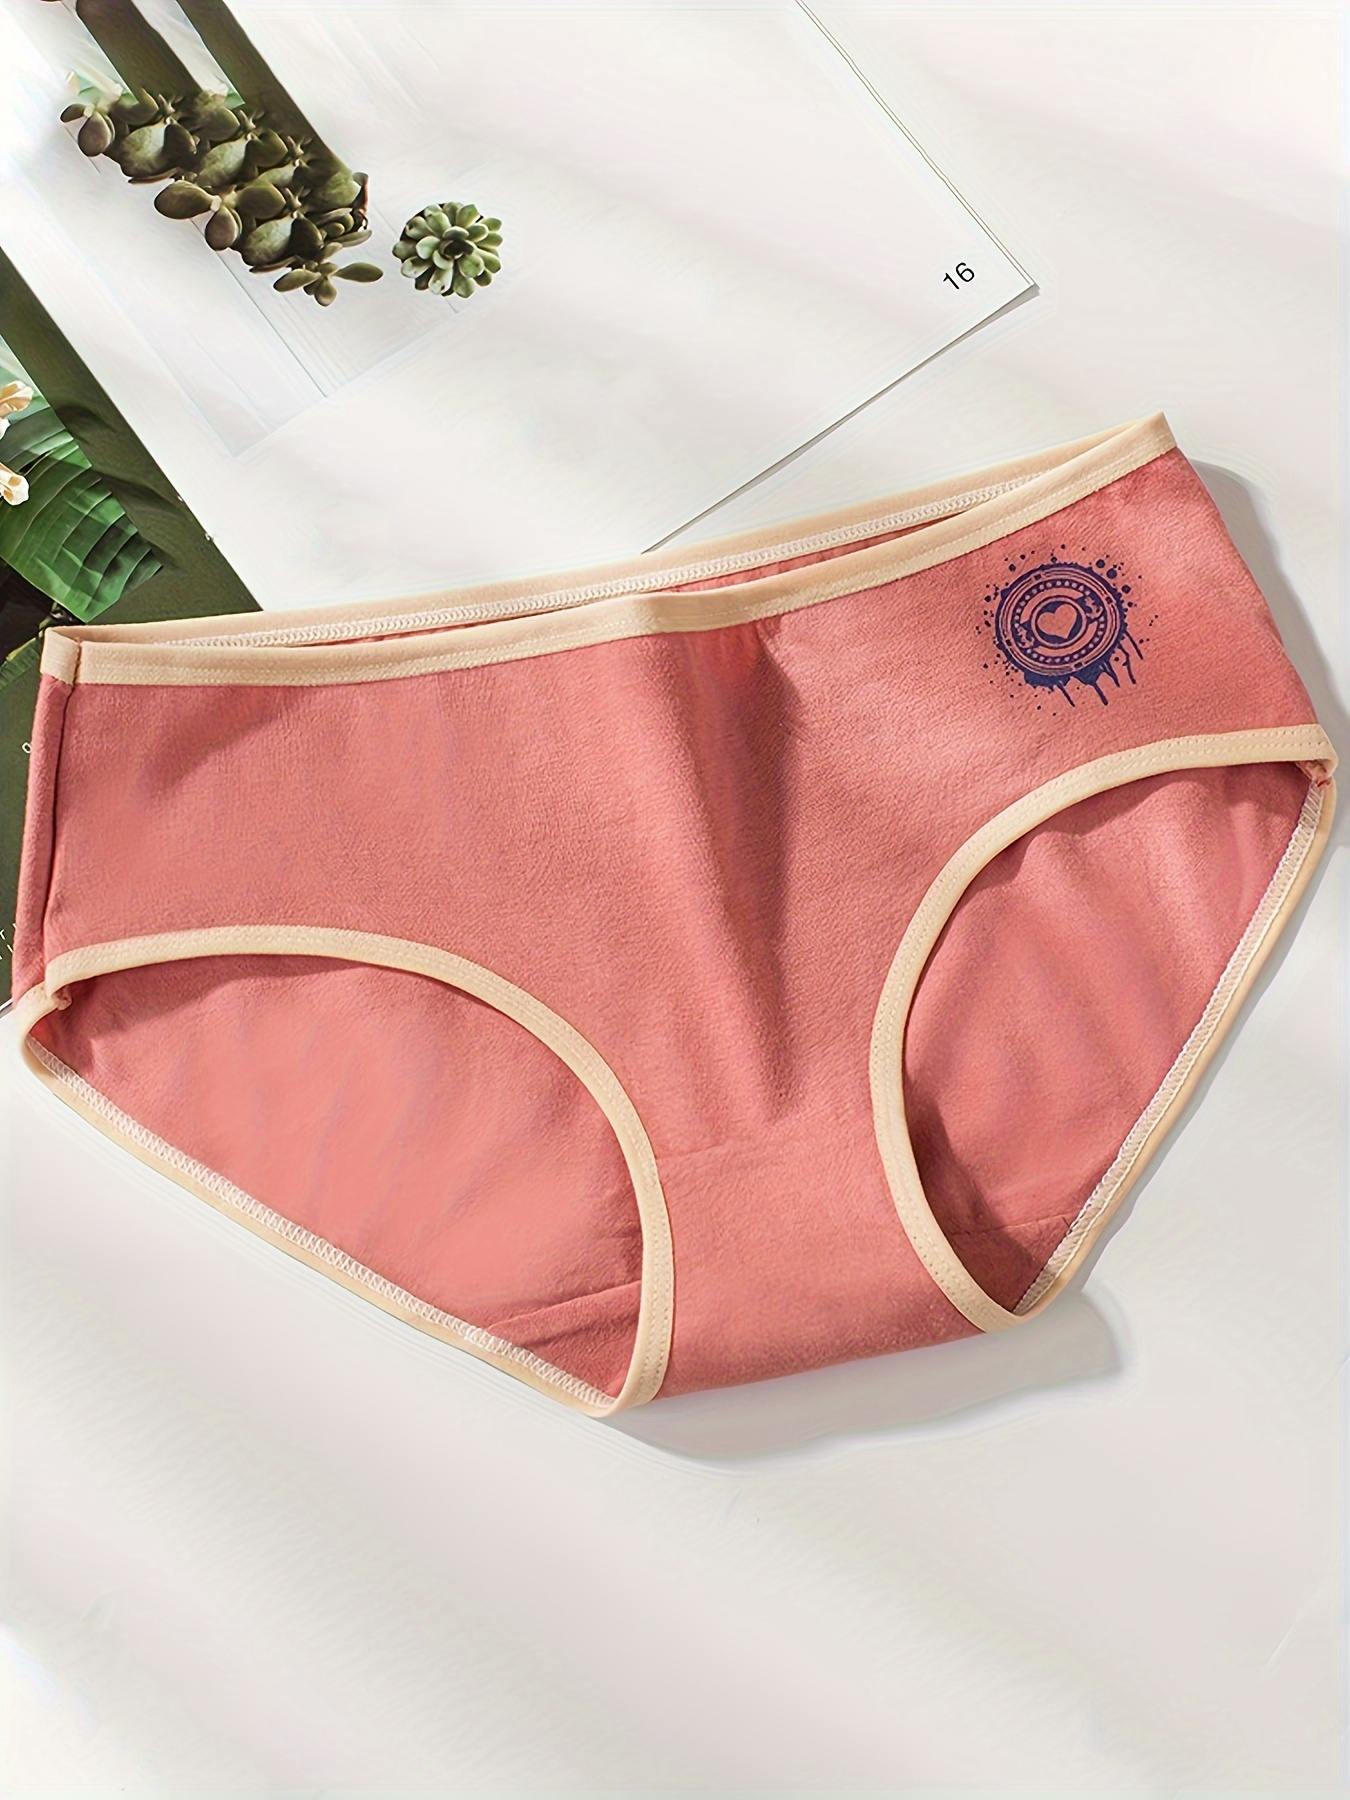  Women's Cotton Heart-Shaped Panties Breathable